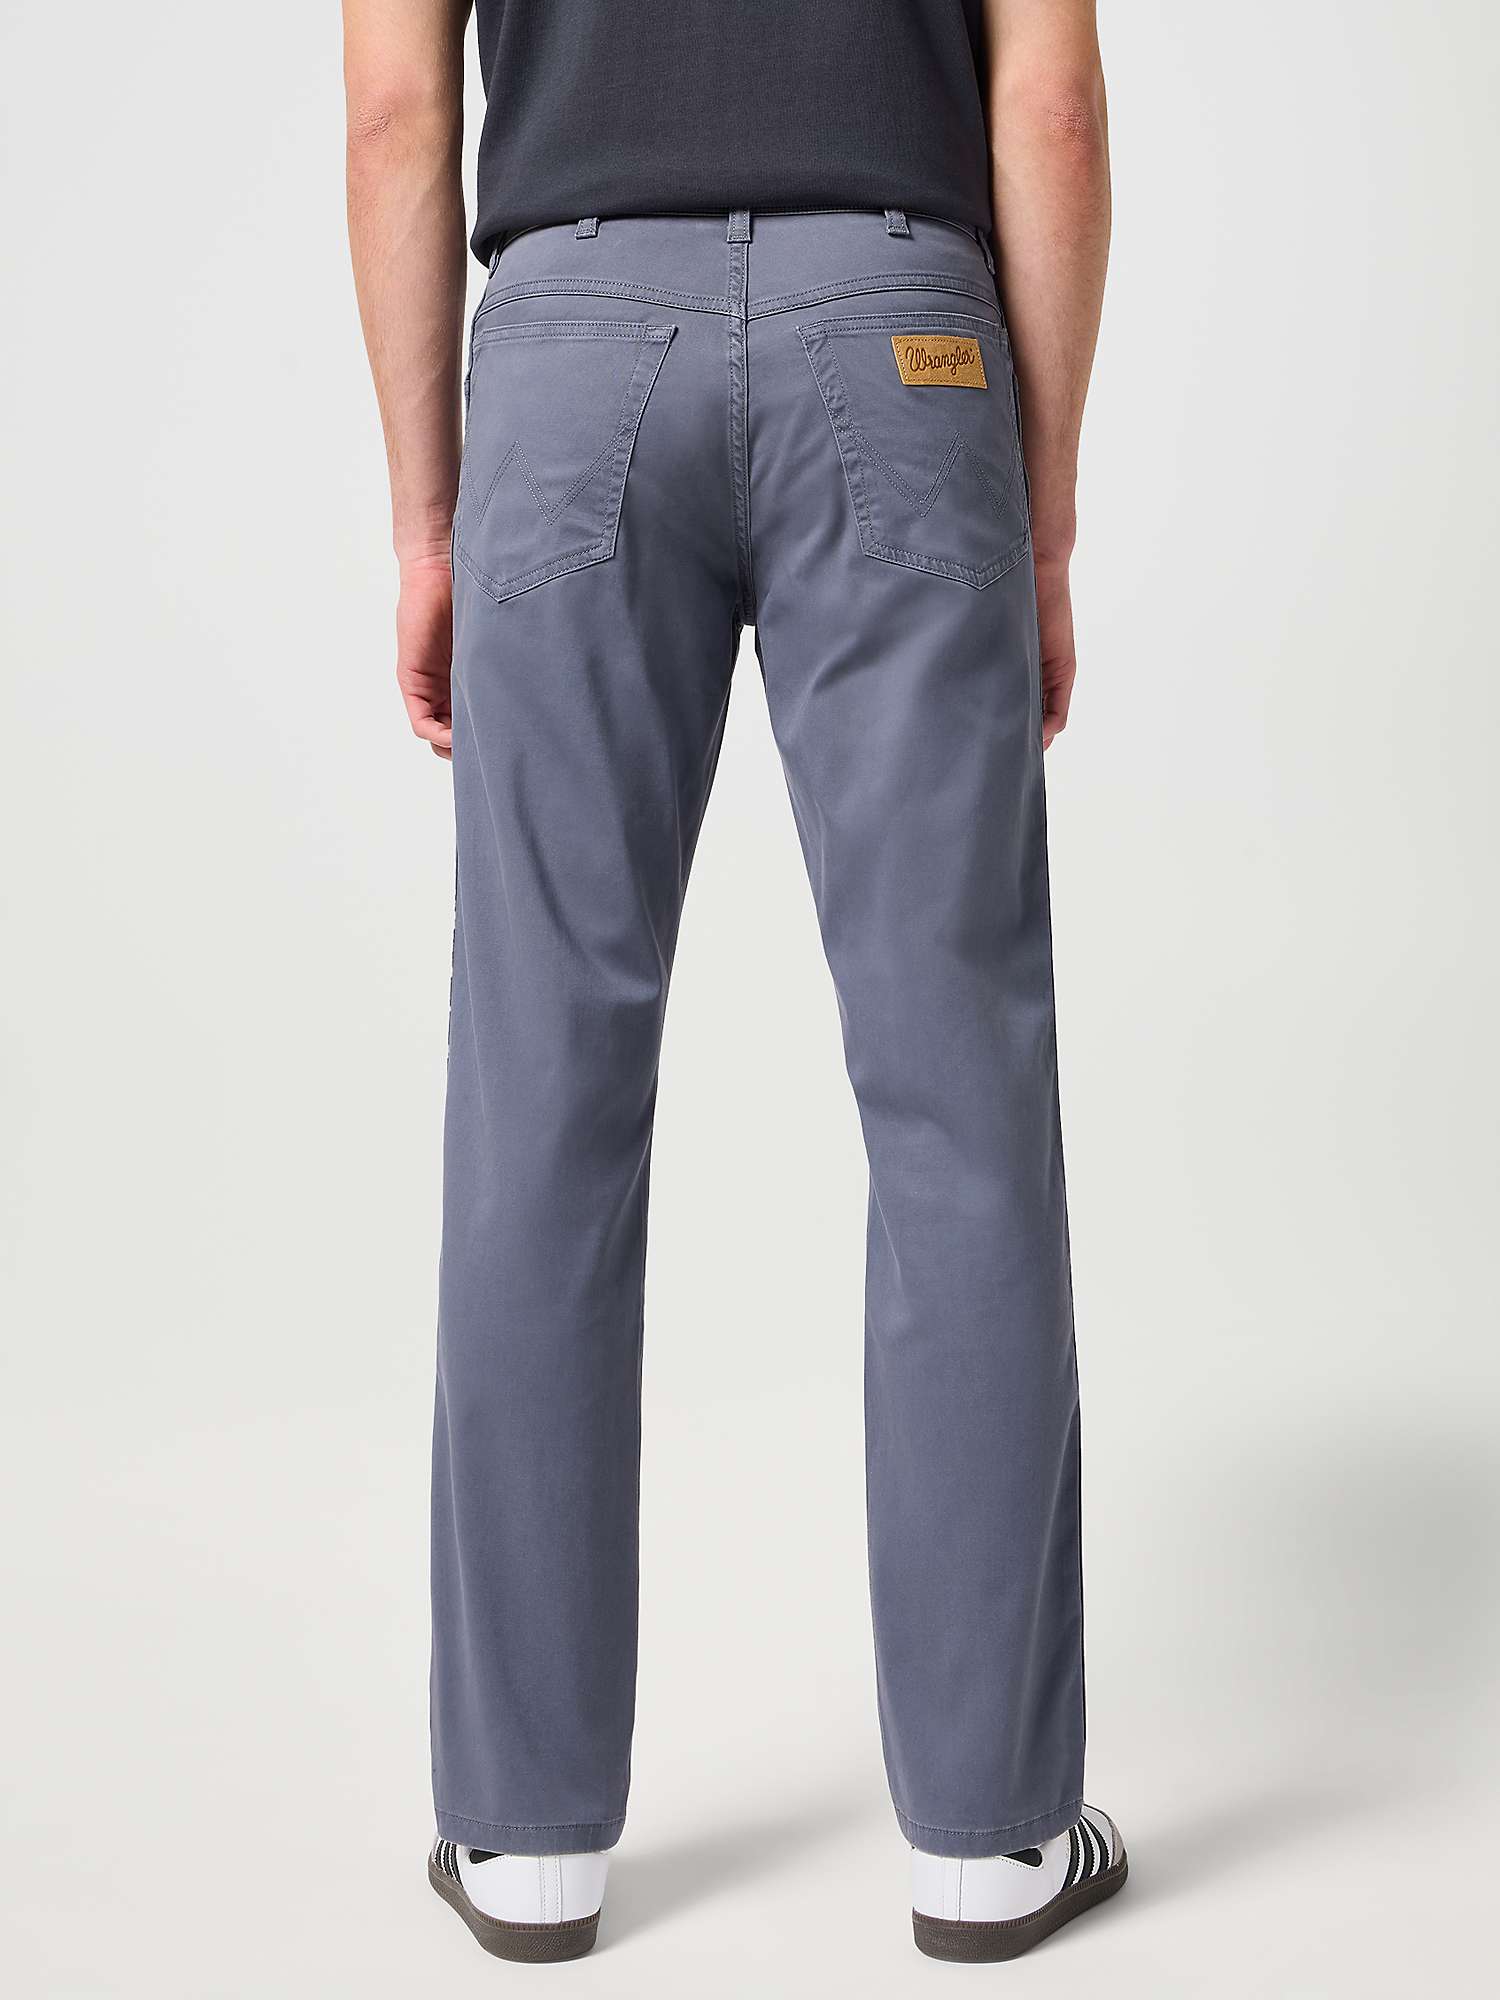 Buy Wrangler Texas Straight Fit Jeans, Turbulence Online at johnlewis.com